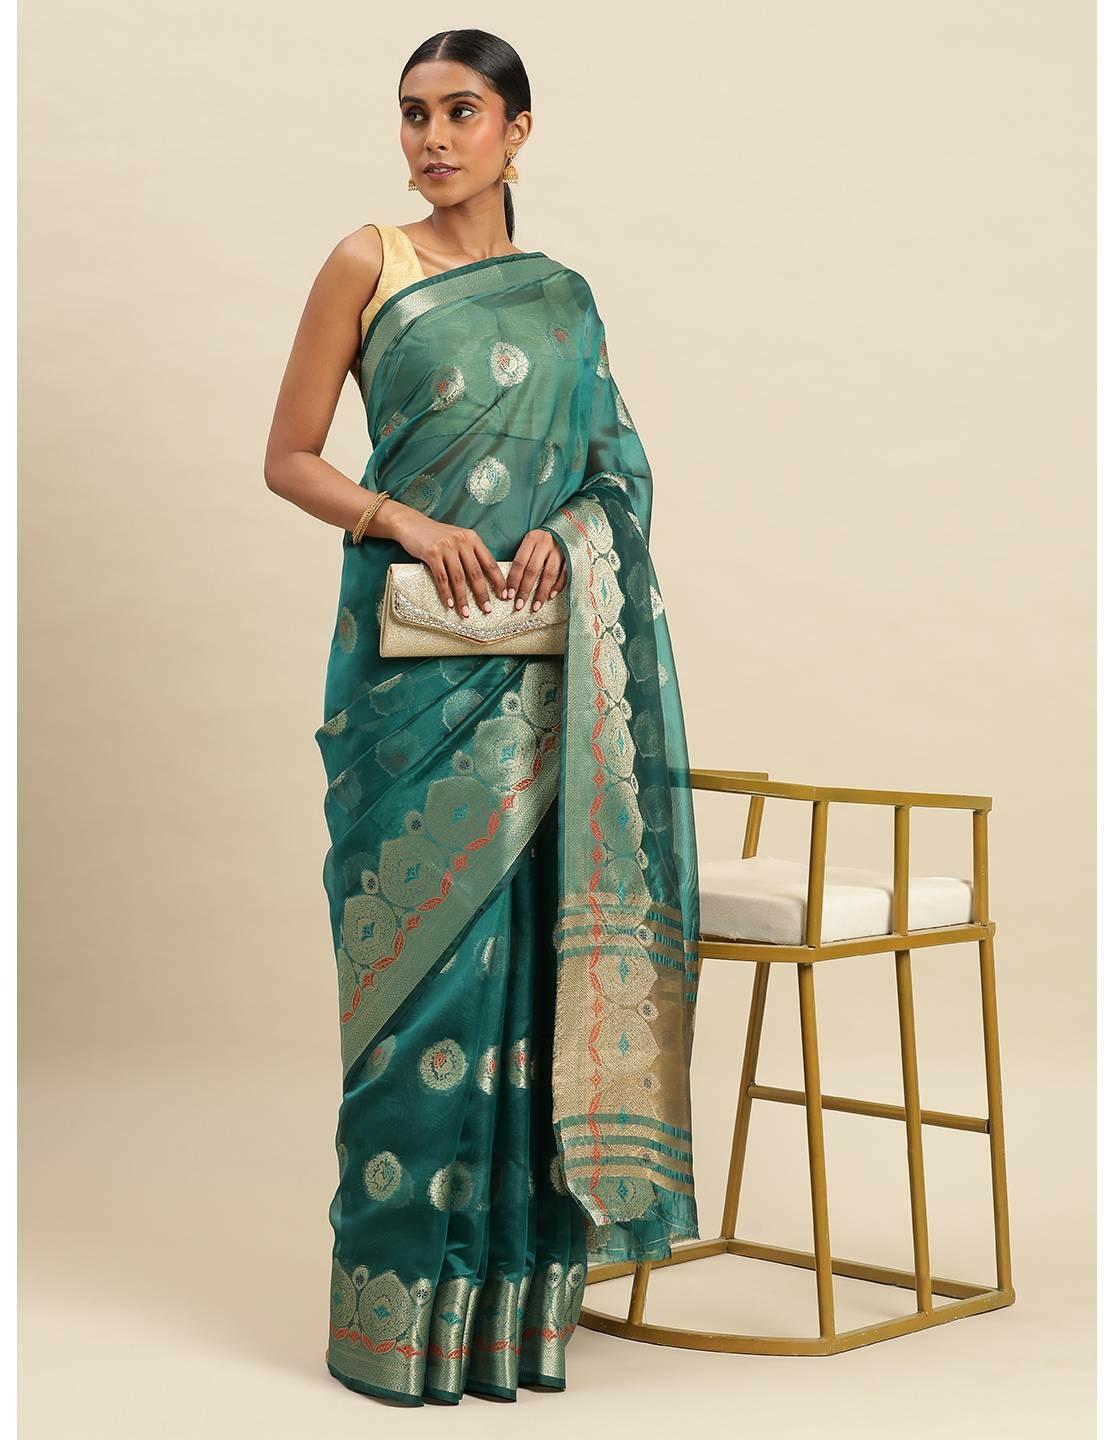 APPLE LIFESTYLE-Top Dyed Sarees